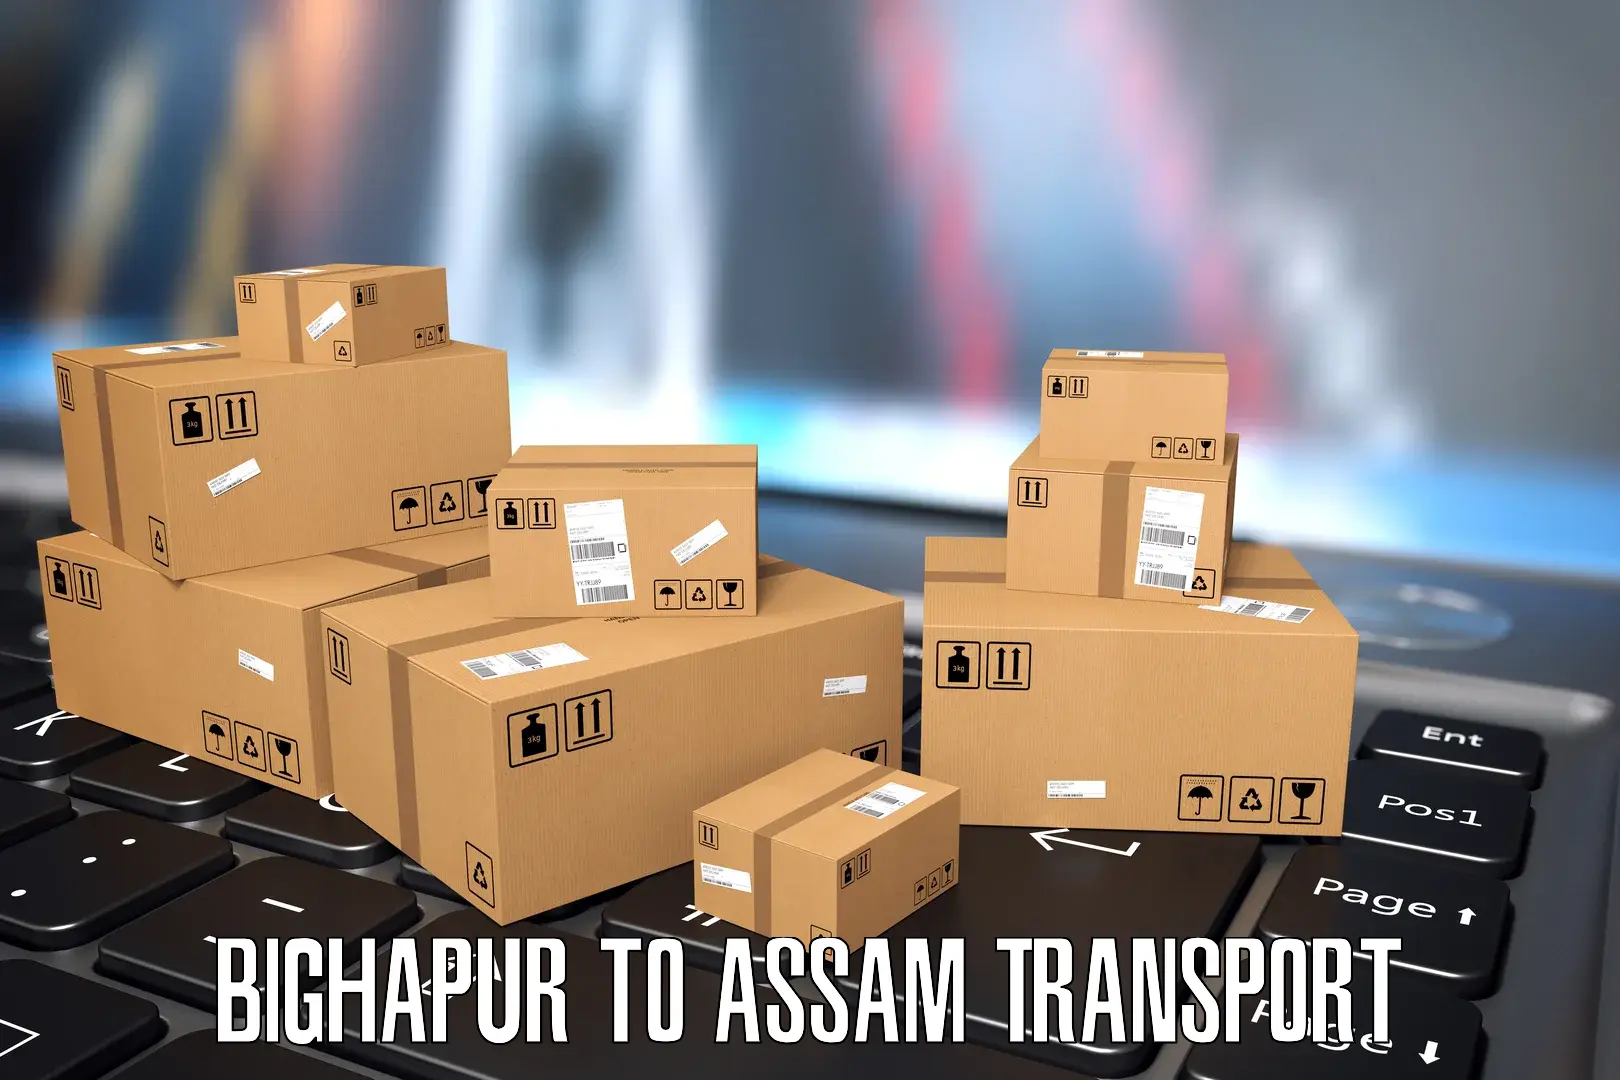 Commercial transport service Bighapur to Guwahati